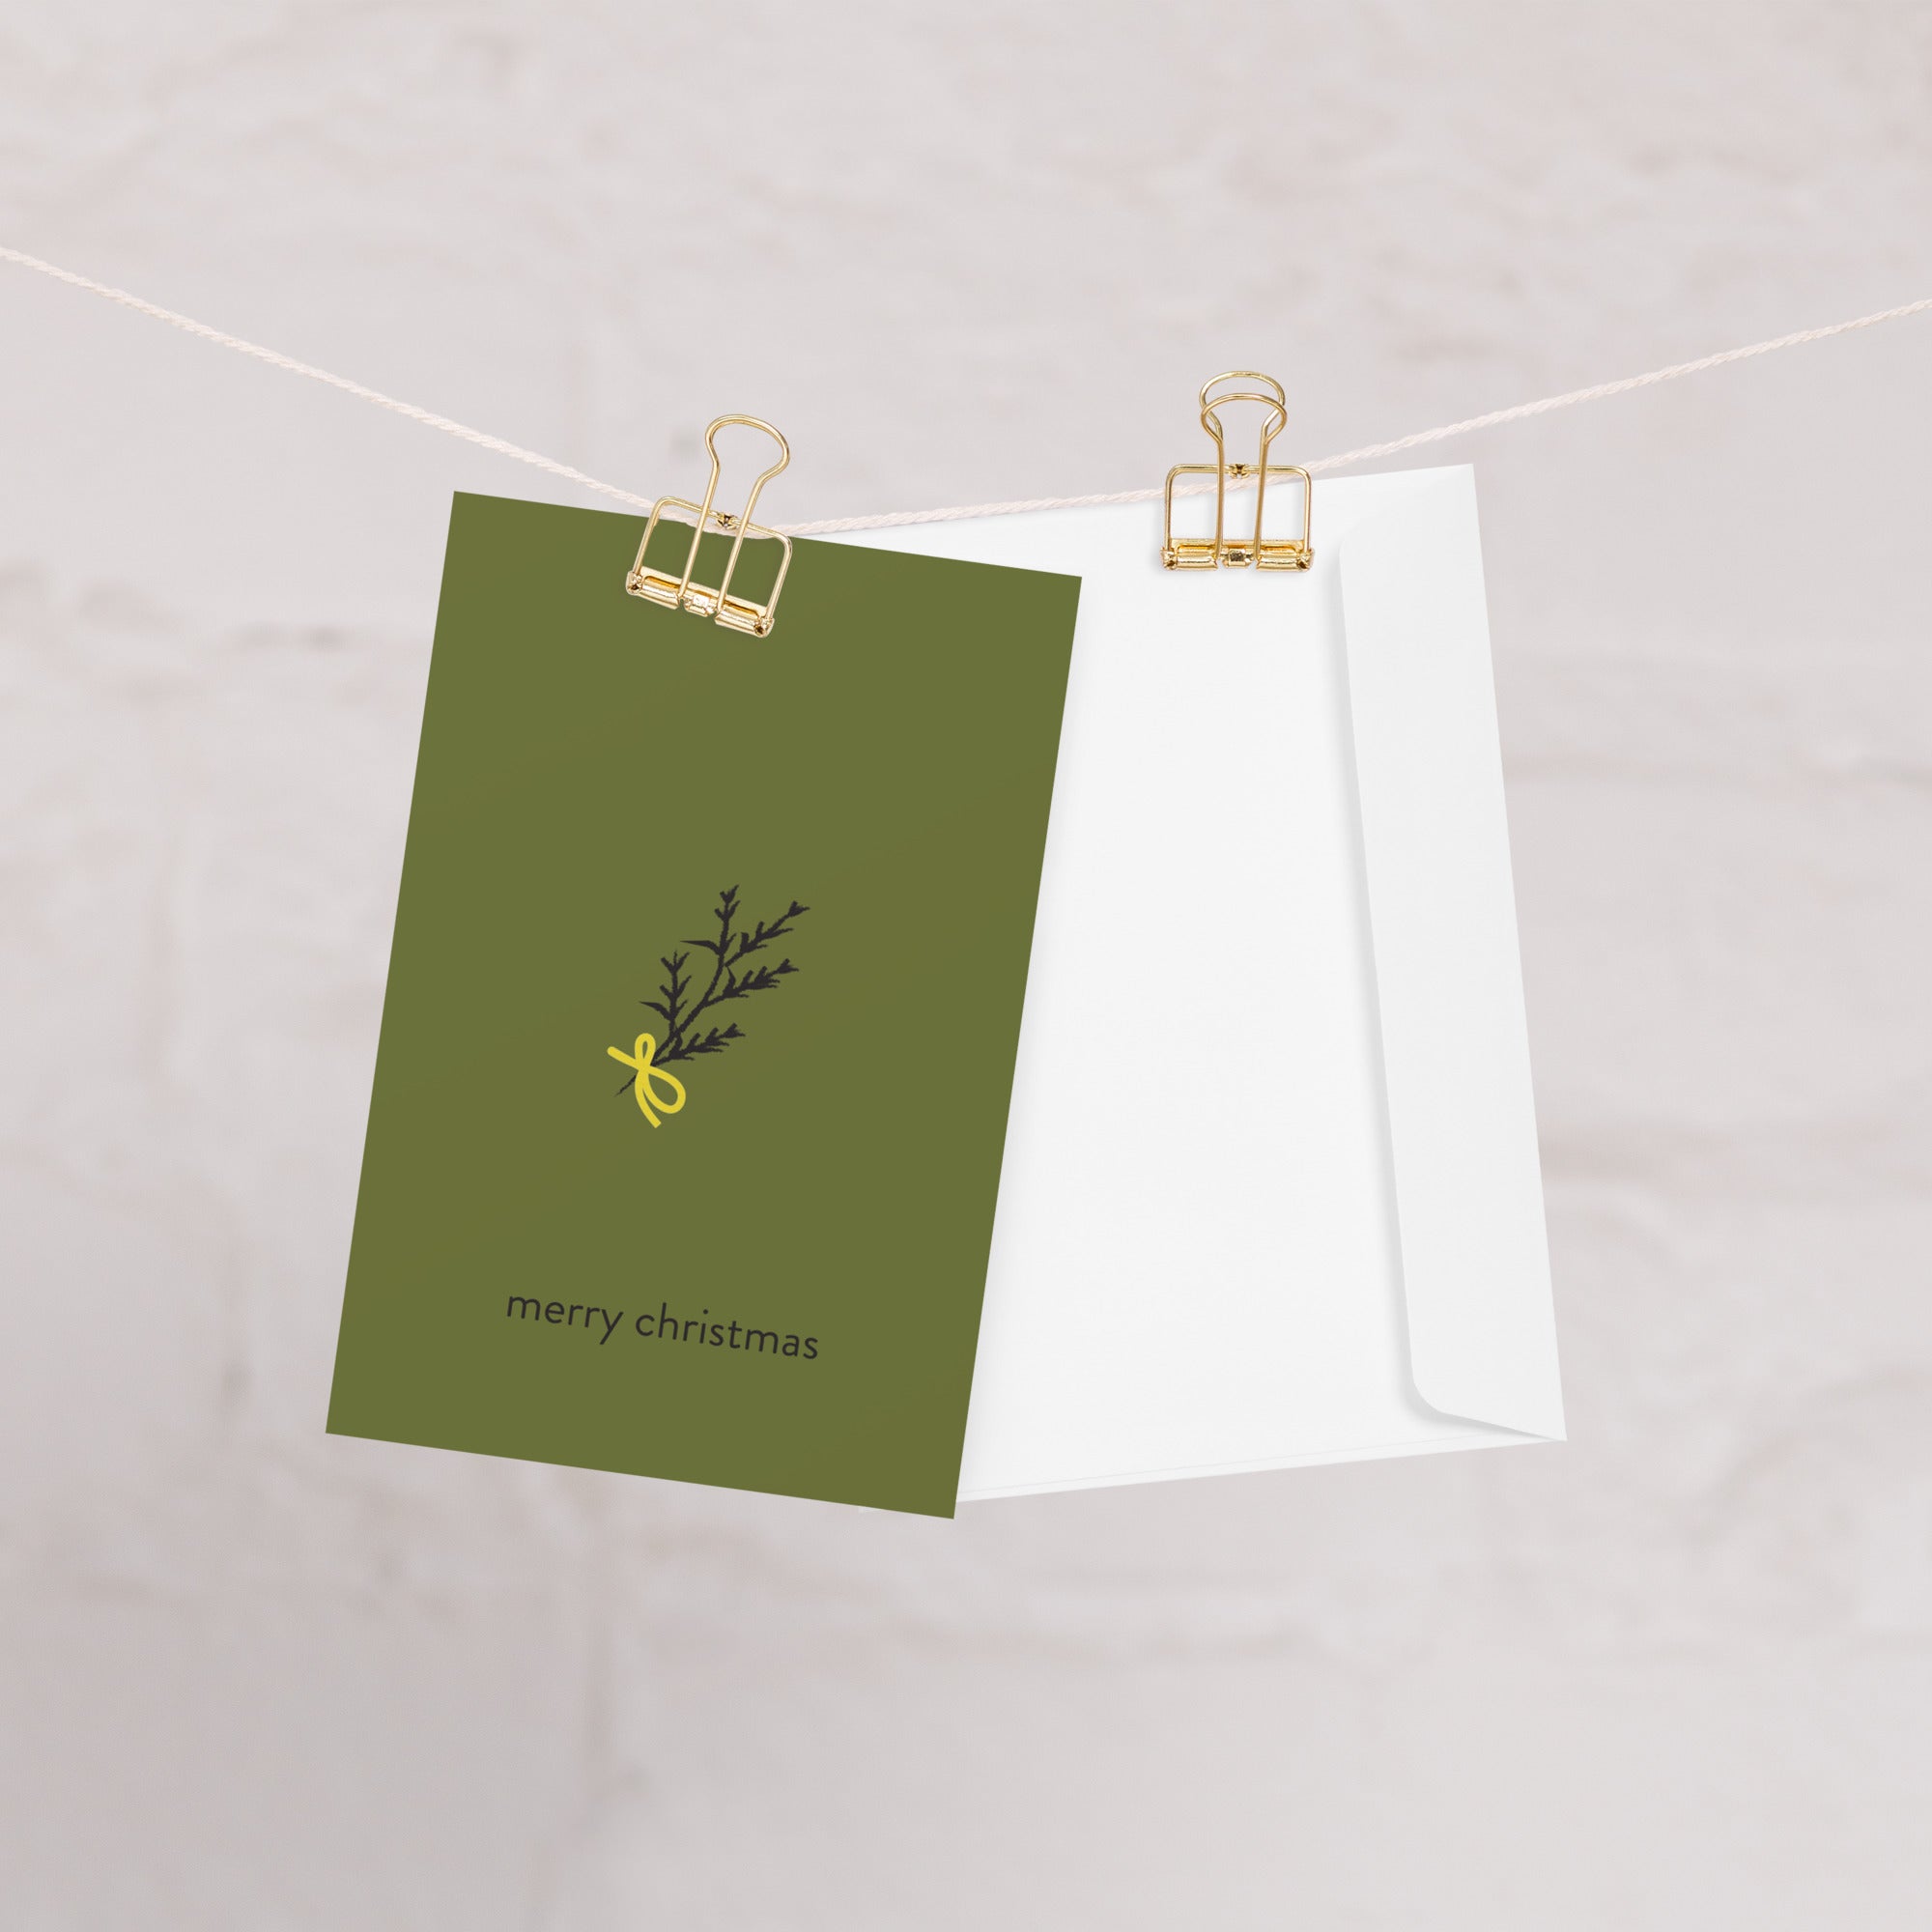 Cute Merry Christmas Cedar Branch Greeting Card with Envelope - Adorable Holiday Wishes Greeting card